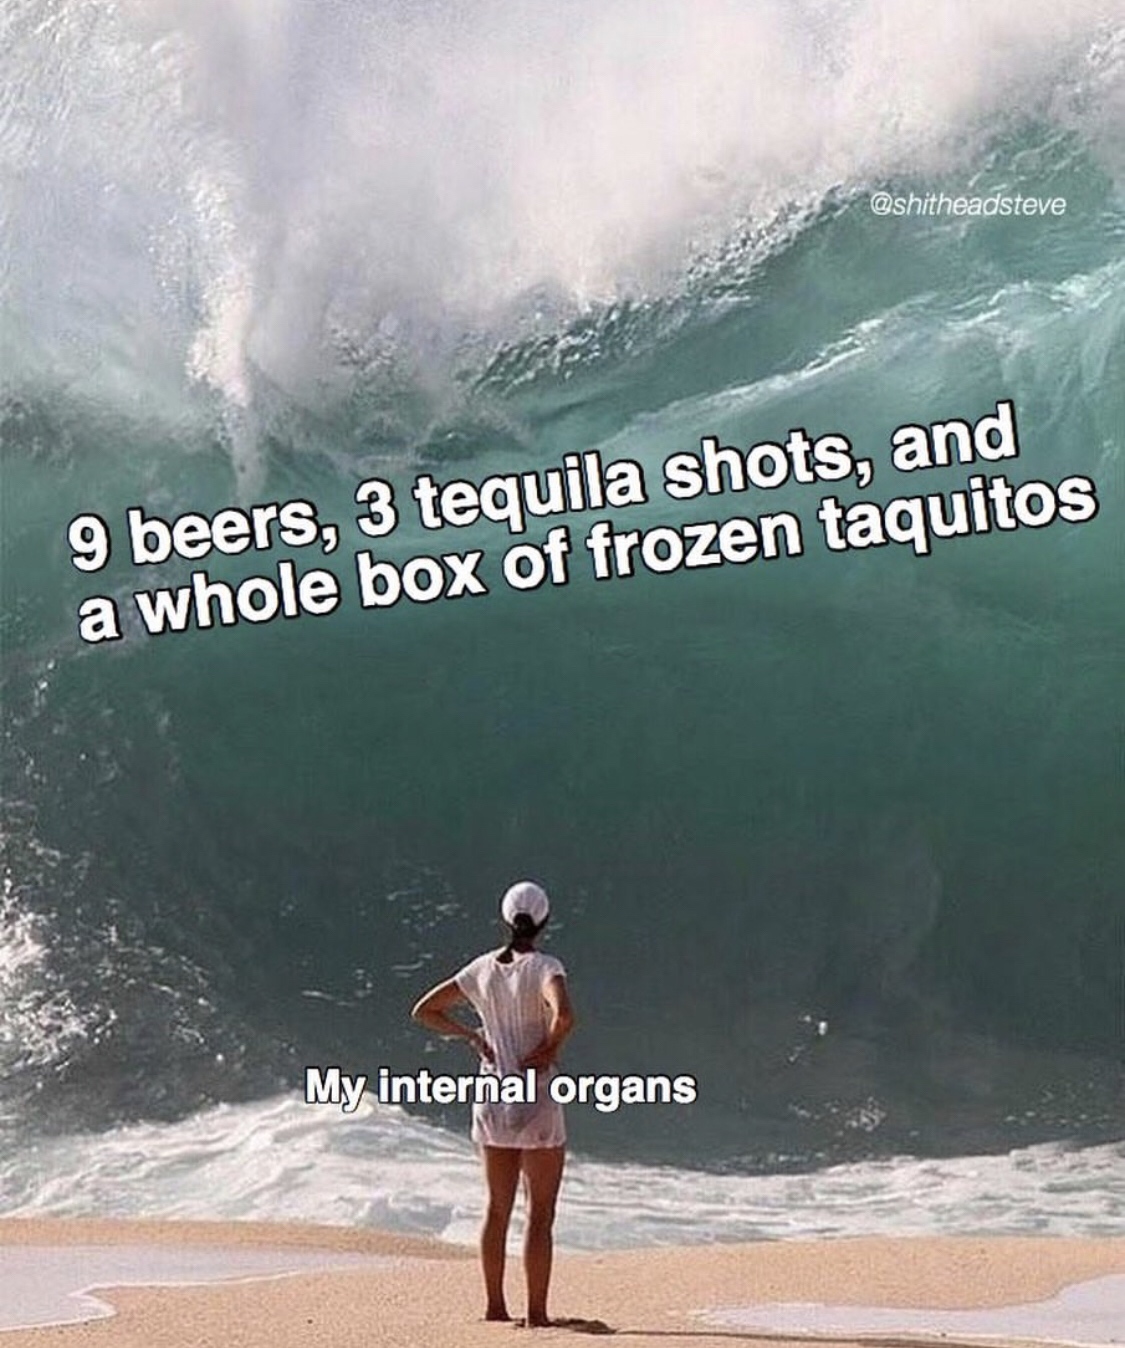 meme wave - 9 beers, 3 tequila shots, and a whole box of frozen taquitos My internal organs